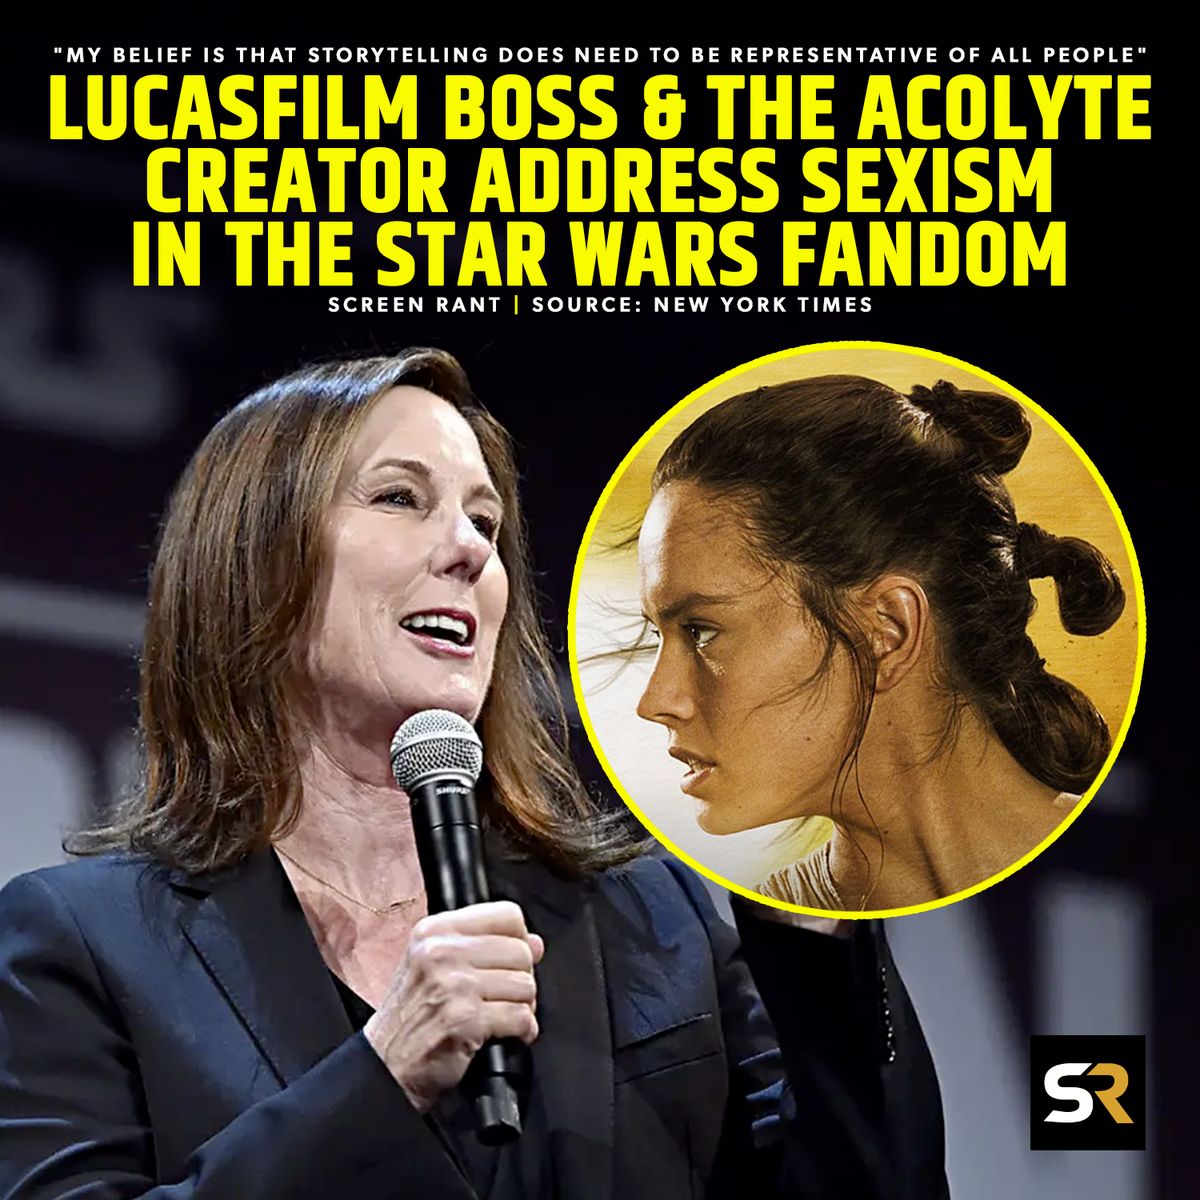 'My belief is that storytelling does need to be representative of all people,' Lucasfilm CEO Kathleen Kennedy insists. 'That’s an easy decision for me.' She notes the problems are greater now because of social media and the sheer scale of franchises. ✨ bit.ly/3wWUI1J